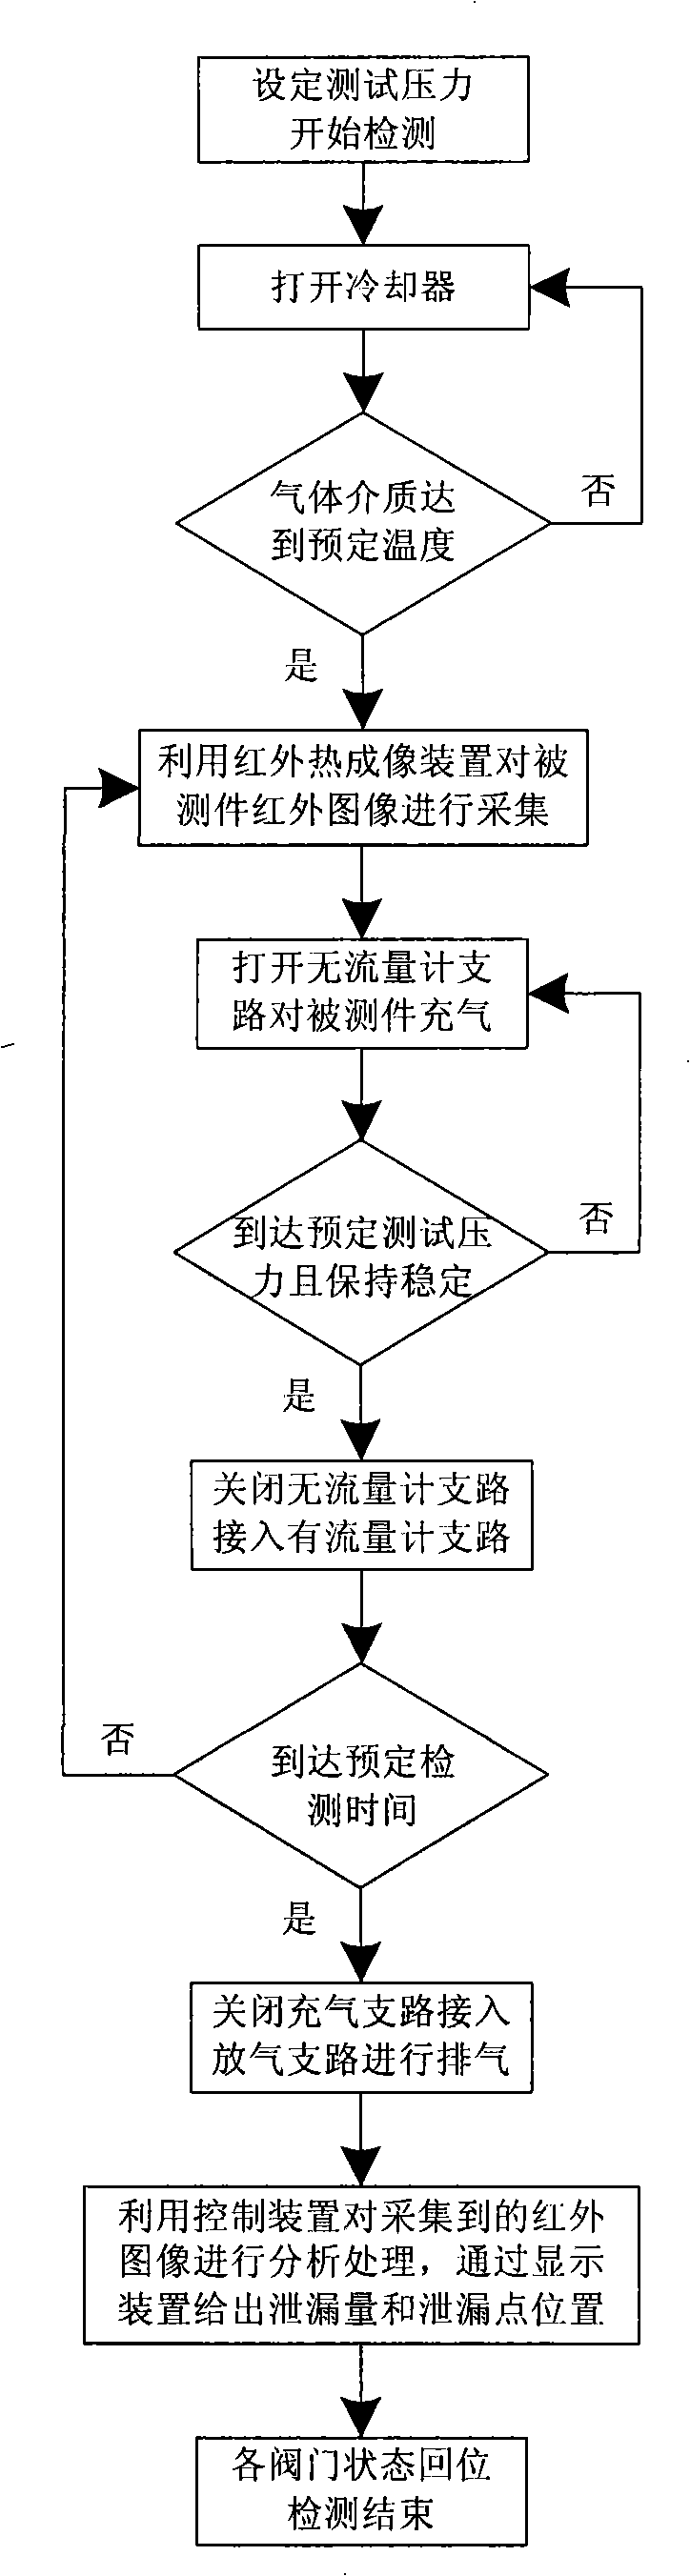 Method and system for detecting and positioning leakage based on infrared imaging technique